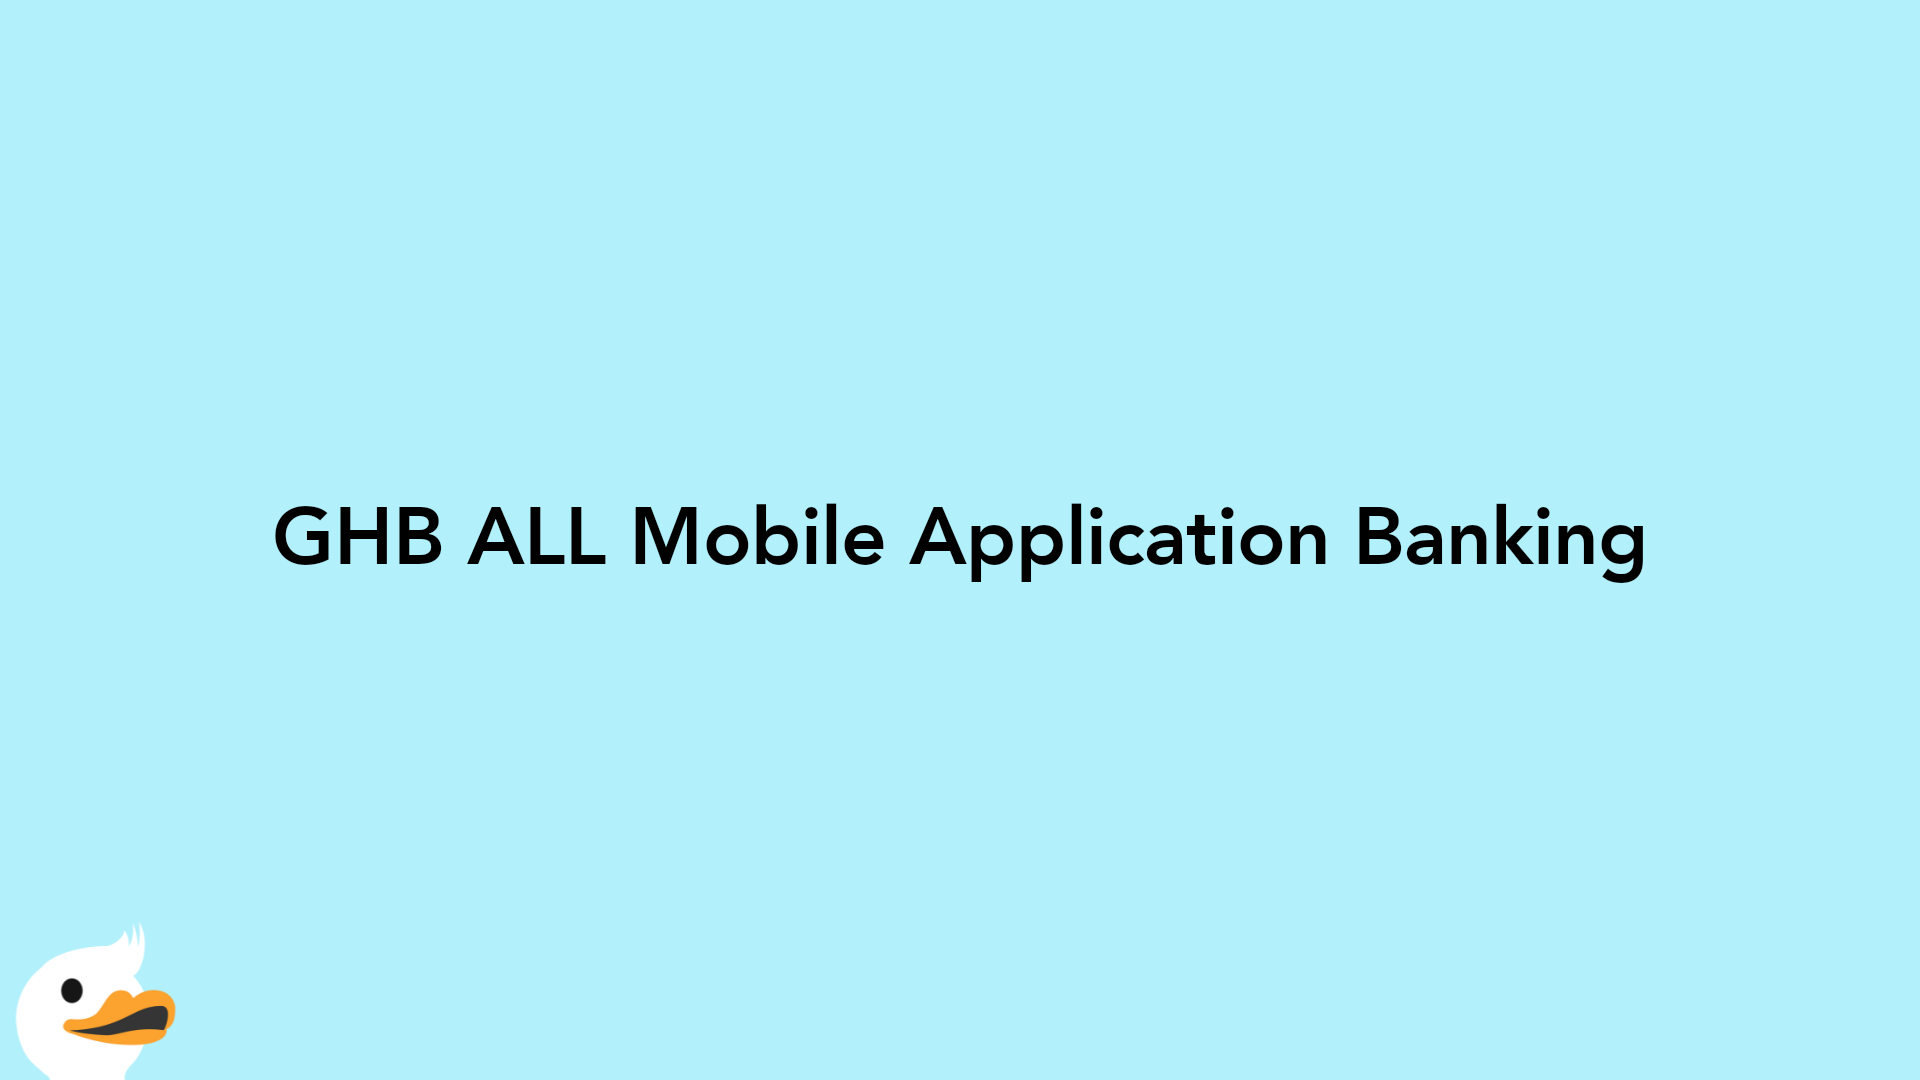 GHB ALL Mobile Application Banking